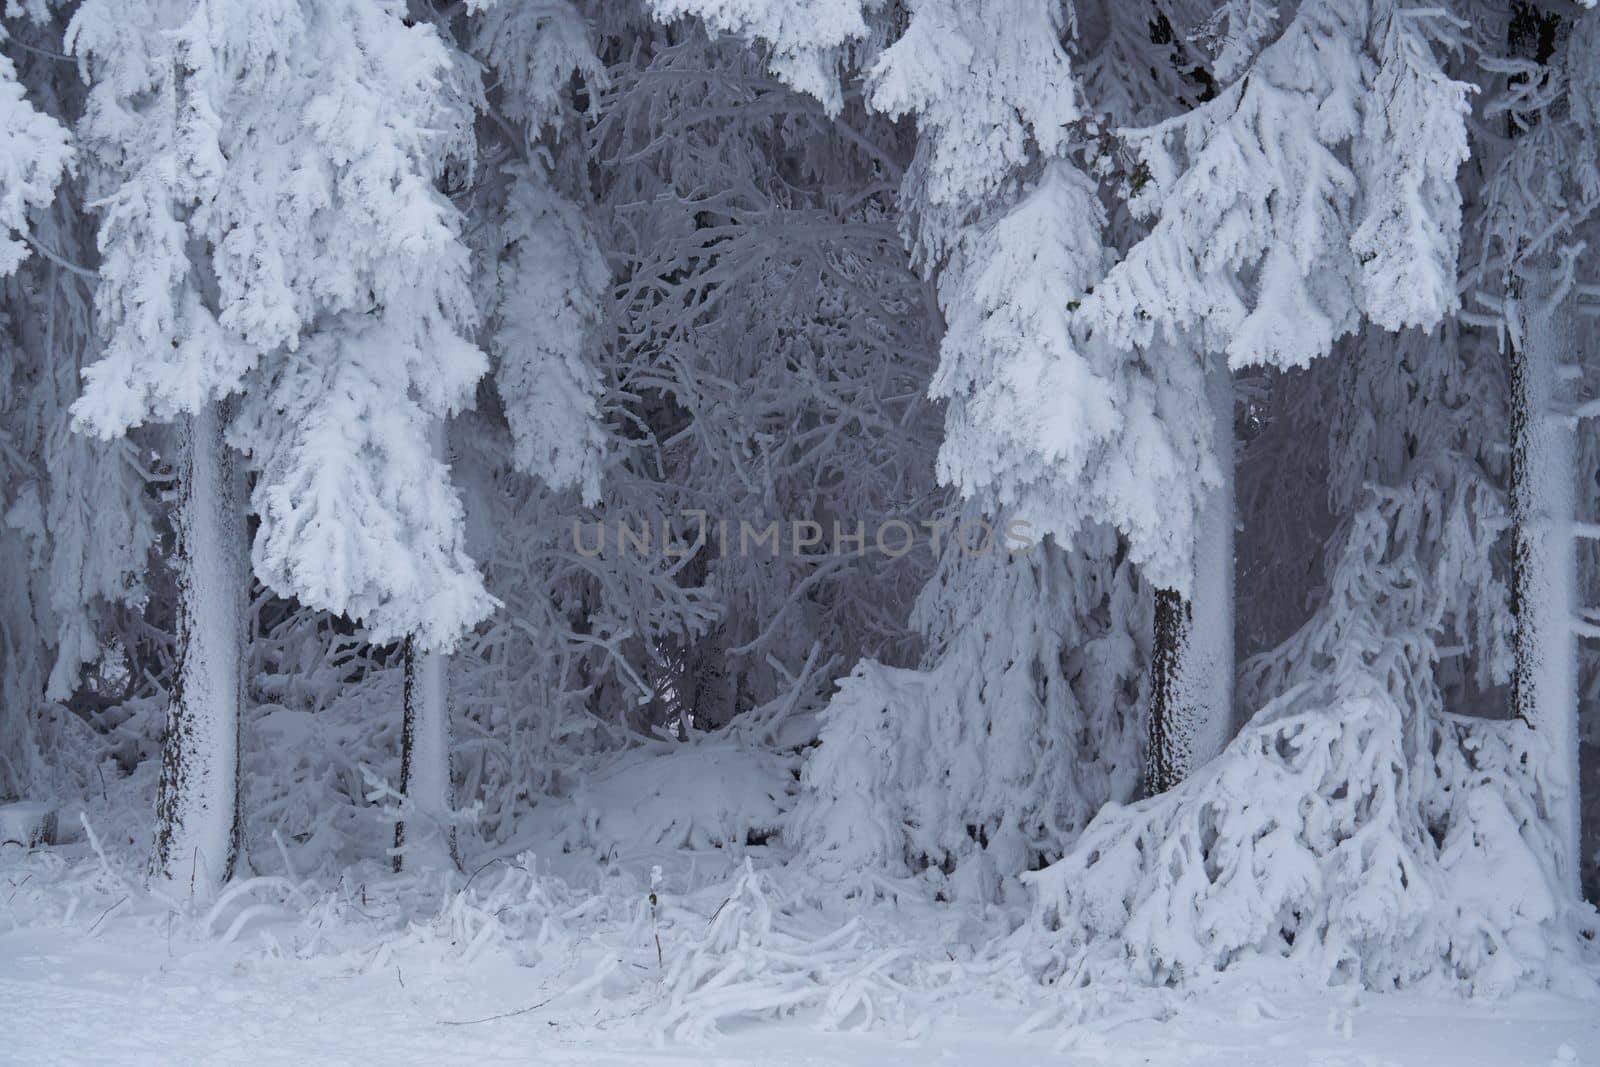 Winter landscape in the woods on Wasserkuppe in Rhoen, Hesse, Germany, stream and waterfall in the snow, tall and big pines and snowy firs, all covered with snow and ice.Icy trees with almost fake geometric shapes.Snowflakes and snow flower by Costin